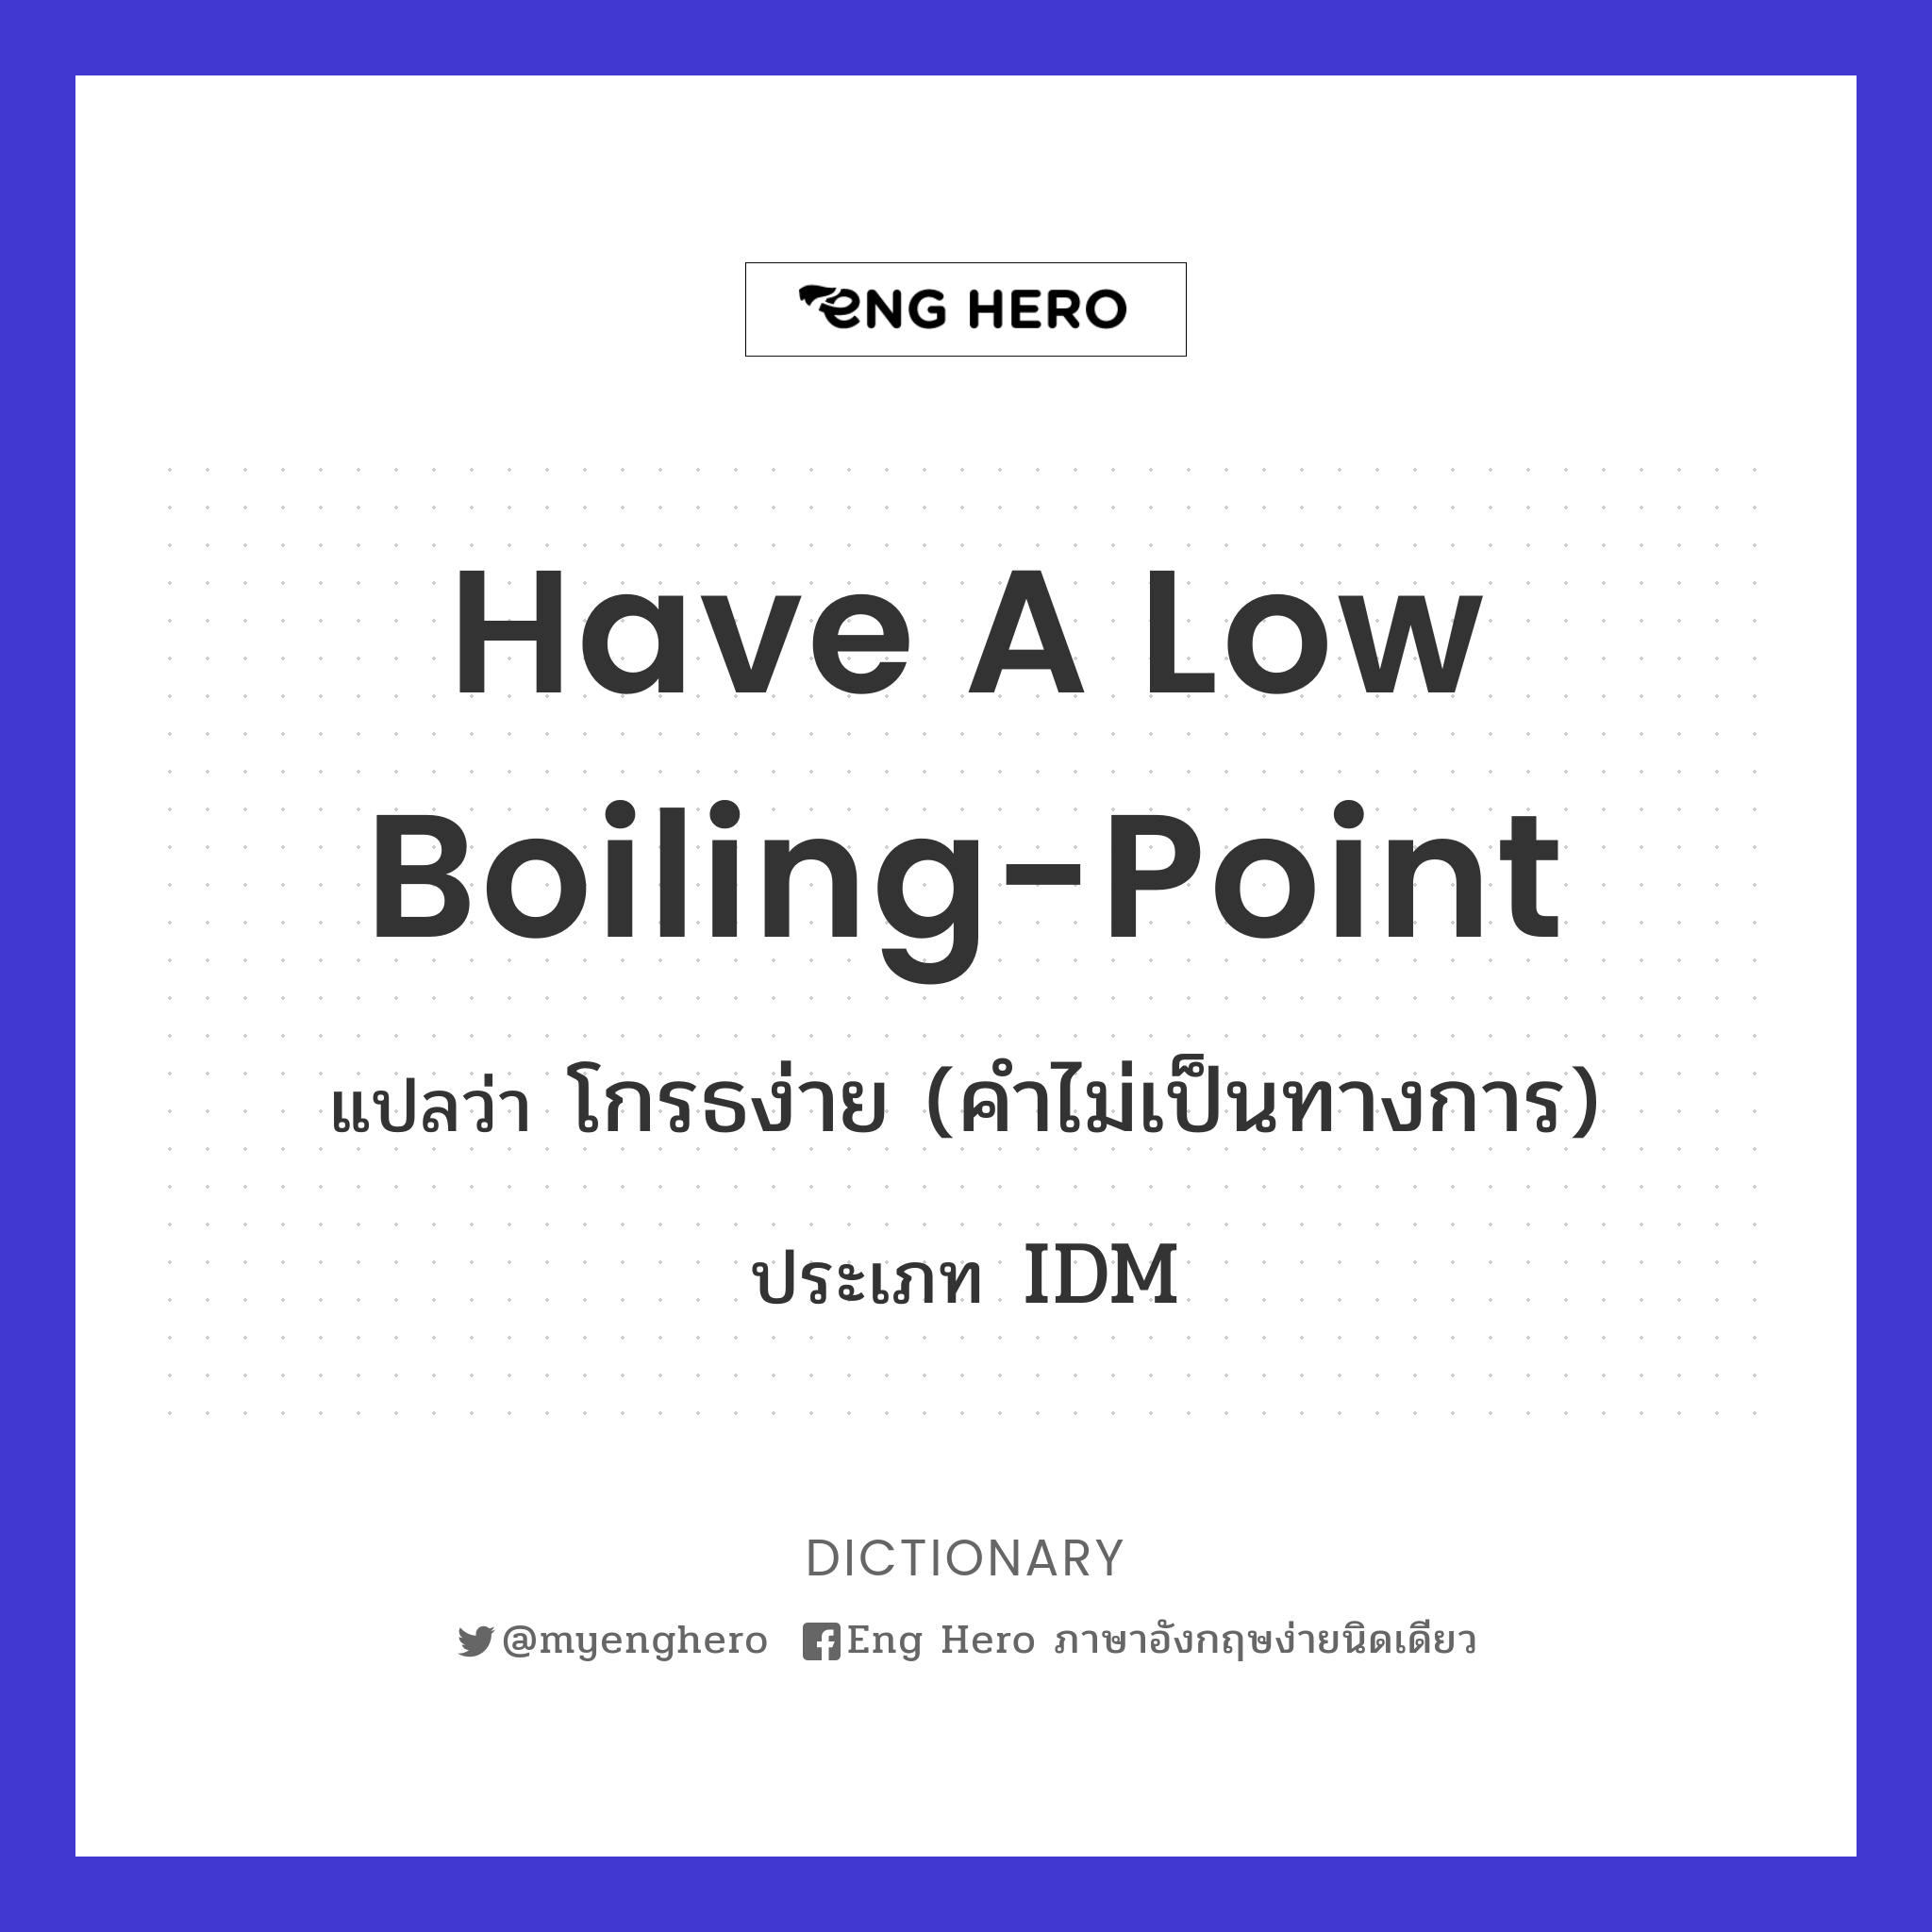 have a low boiling-point